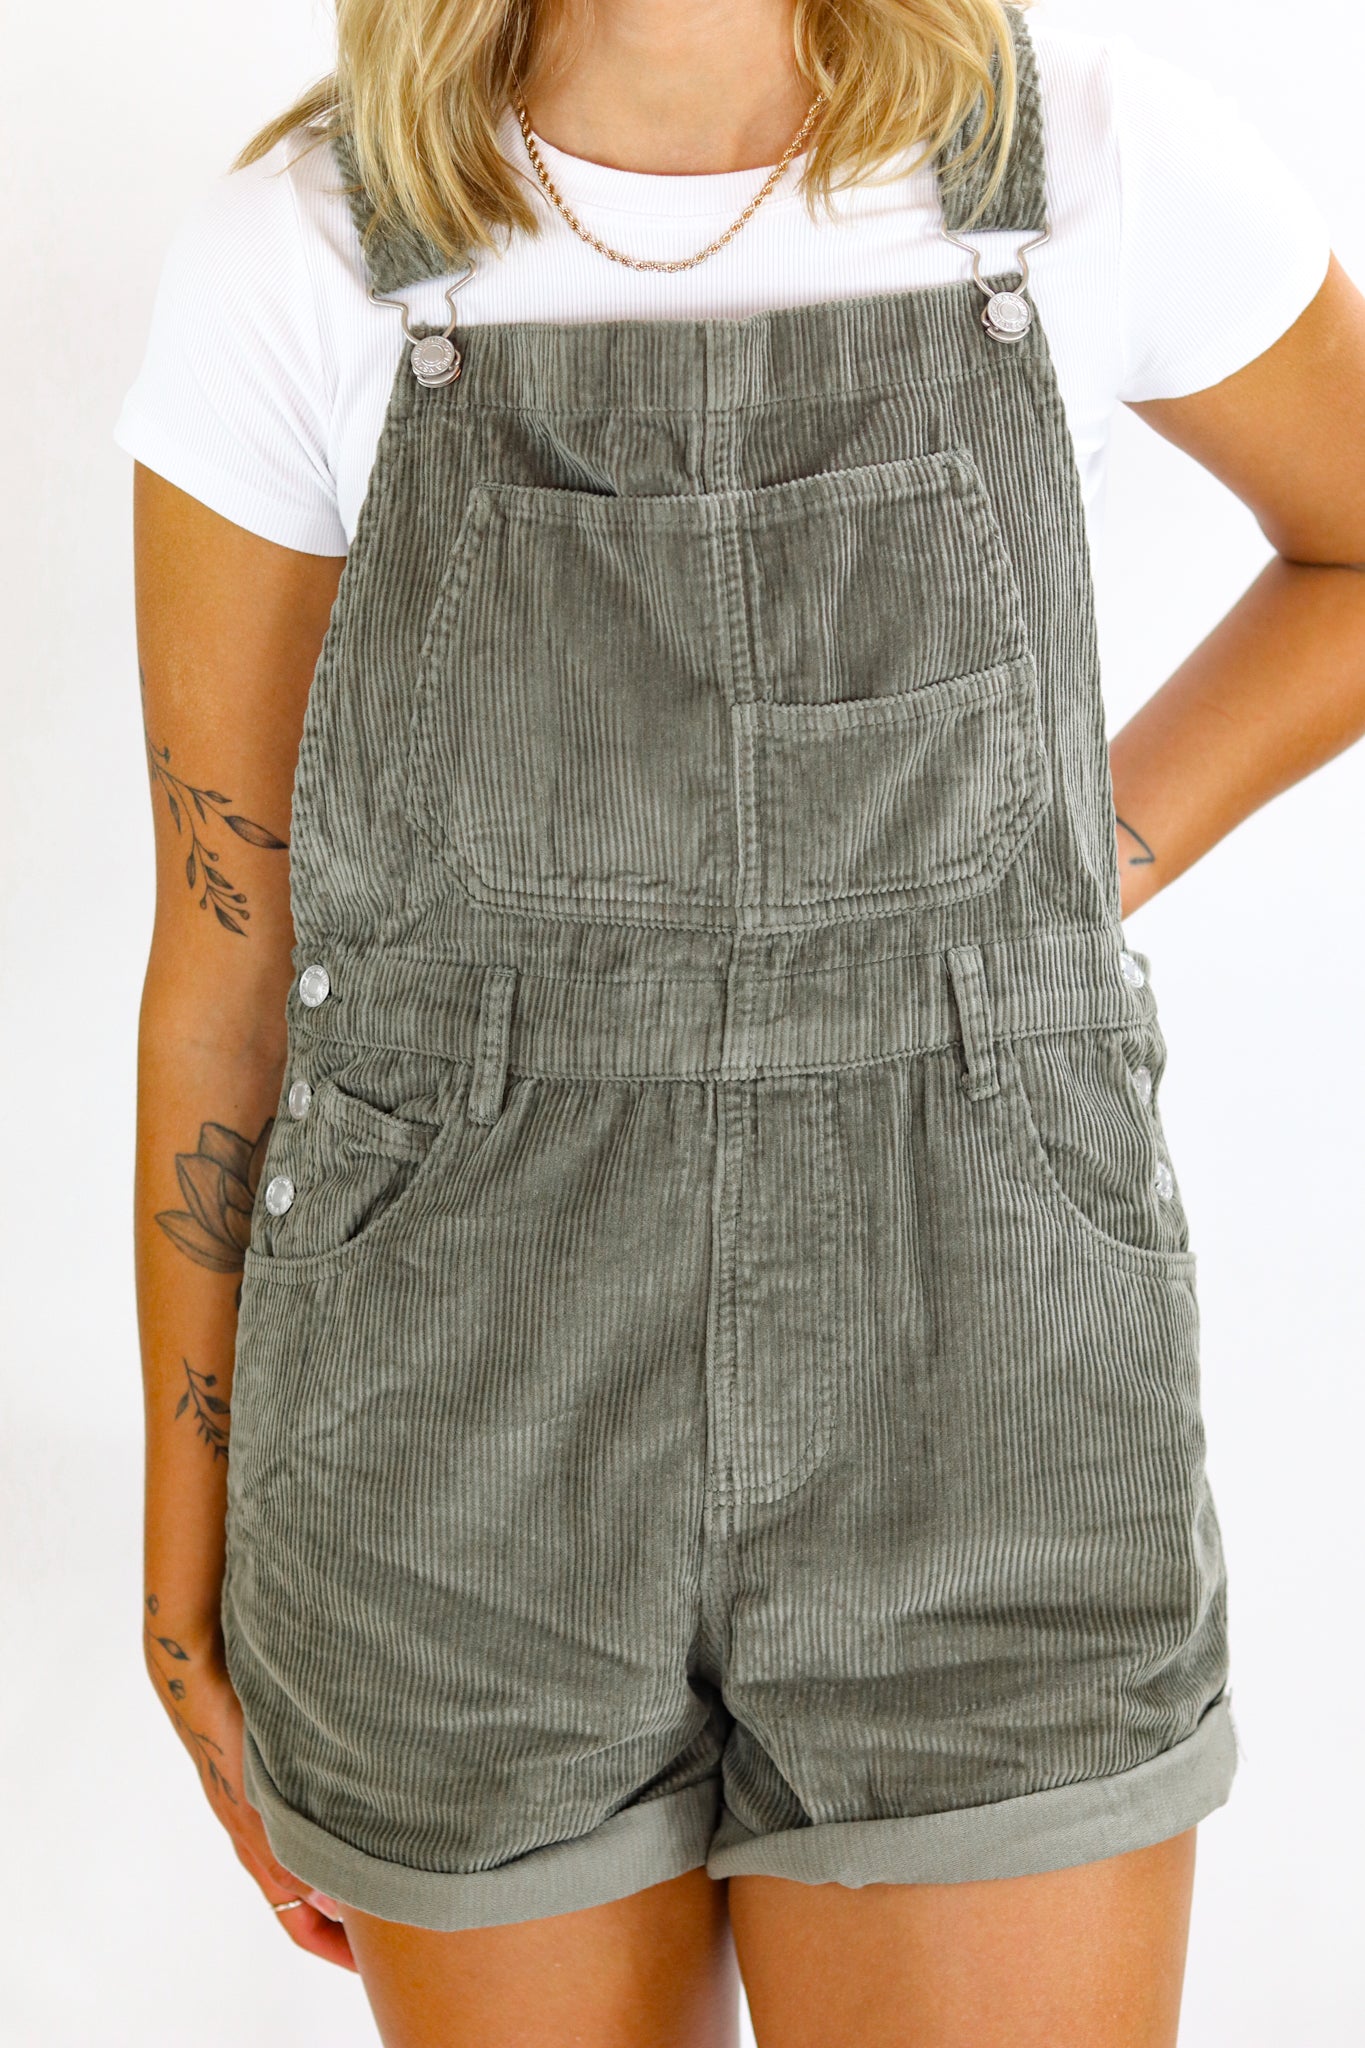 Overachieving Overalls